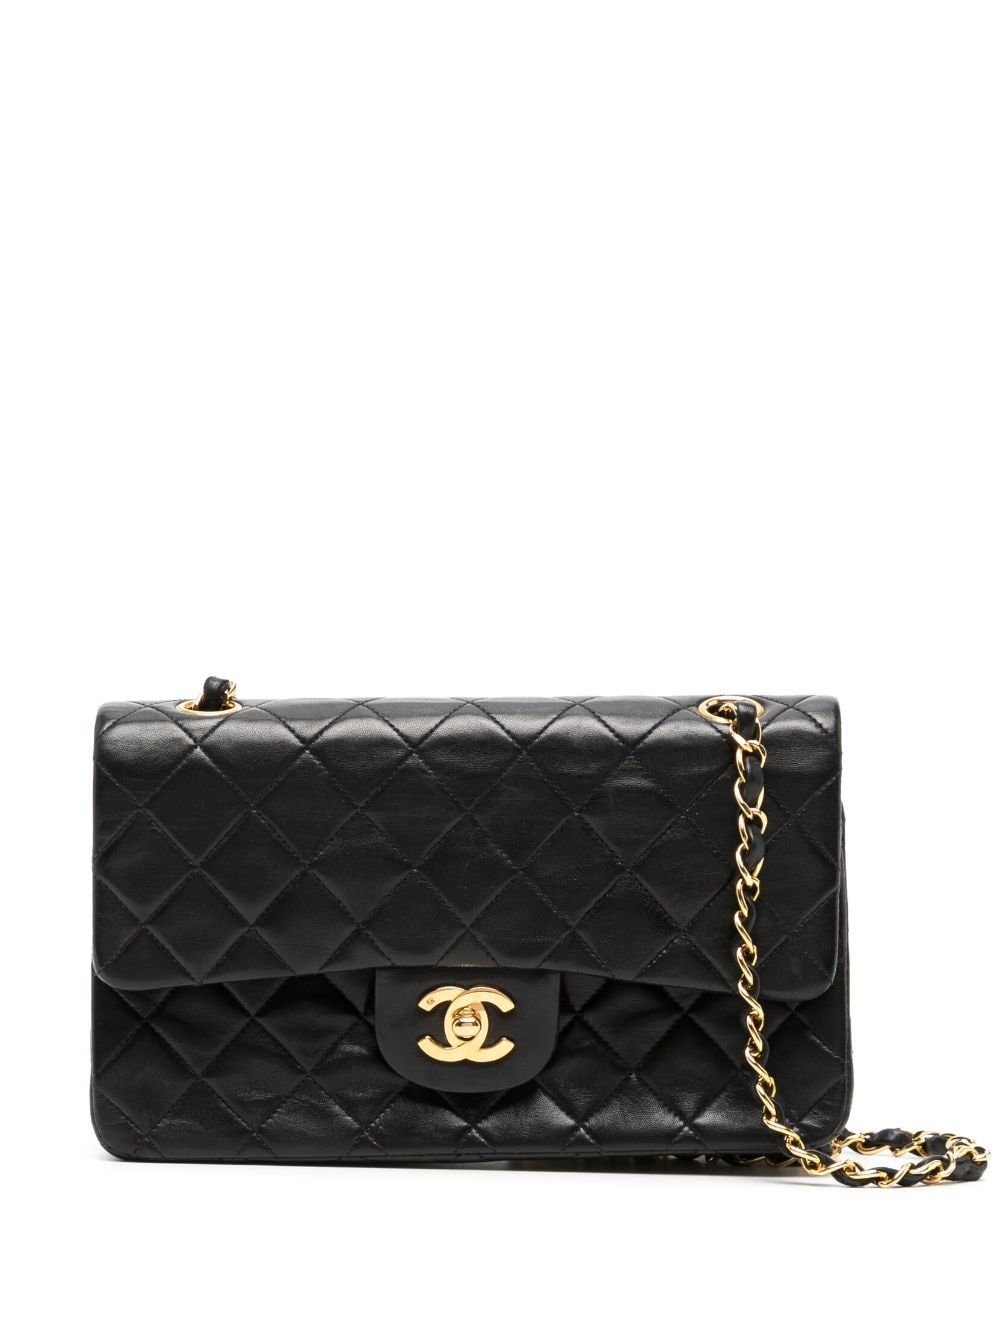 Pre-owned Chanel 1991-1994 Small Double Flap Shoulder Bag In Black